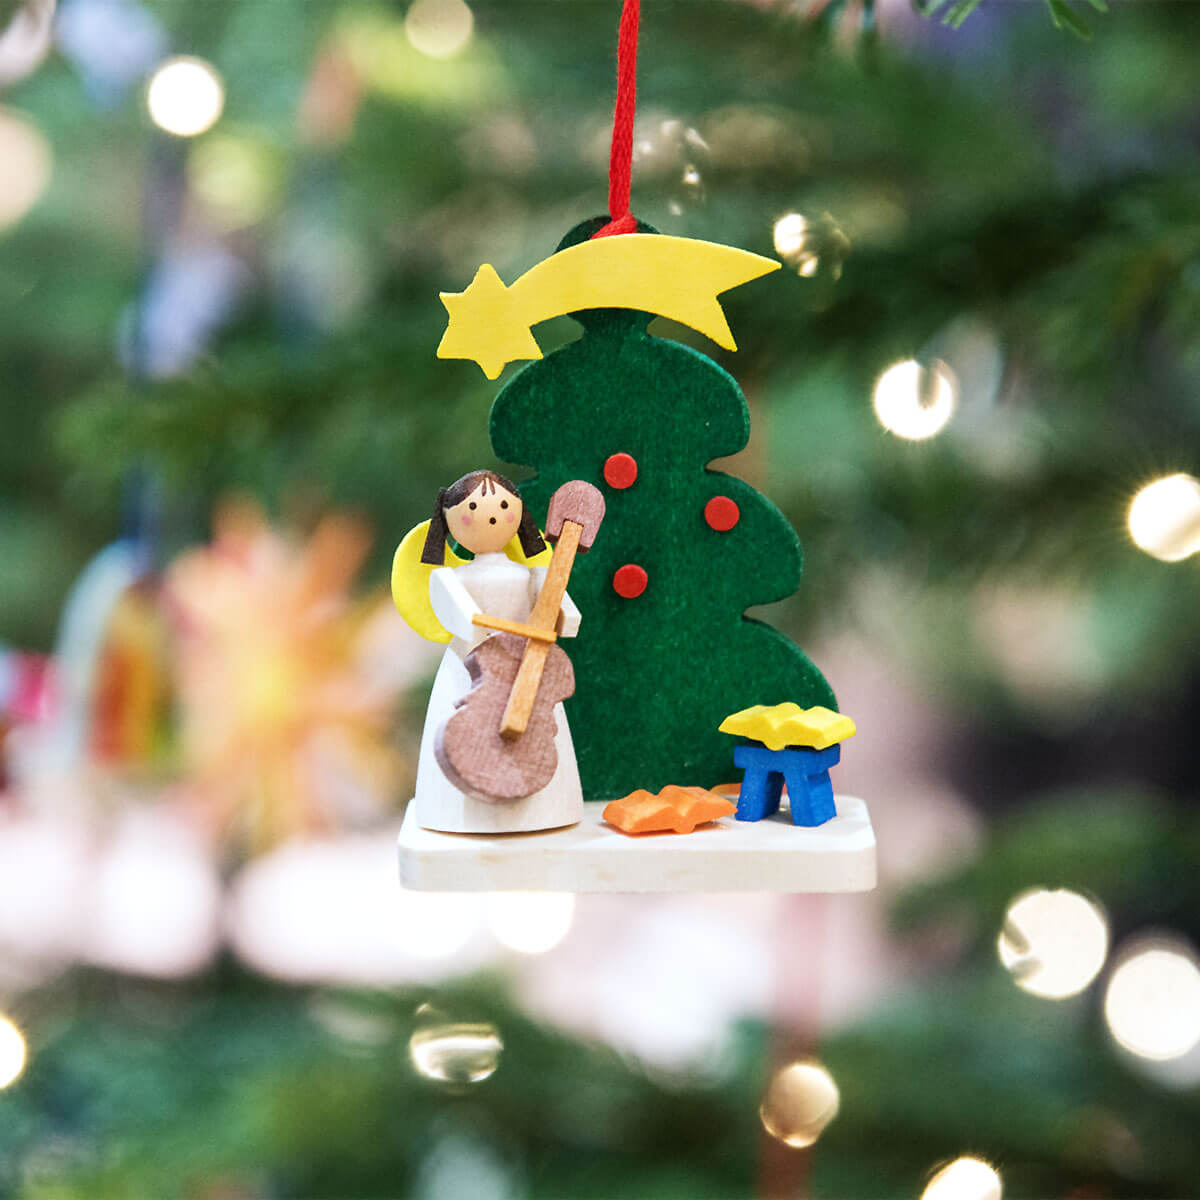 Tree 'Angel' Ornament with rabbits